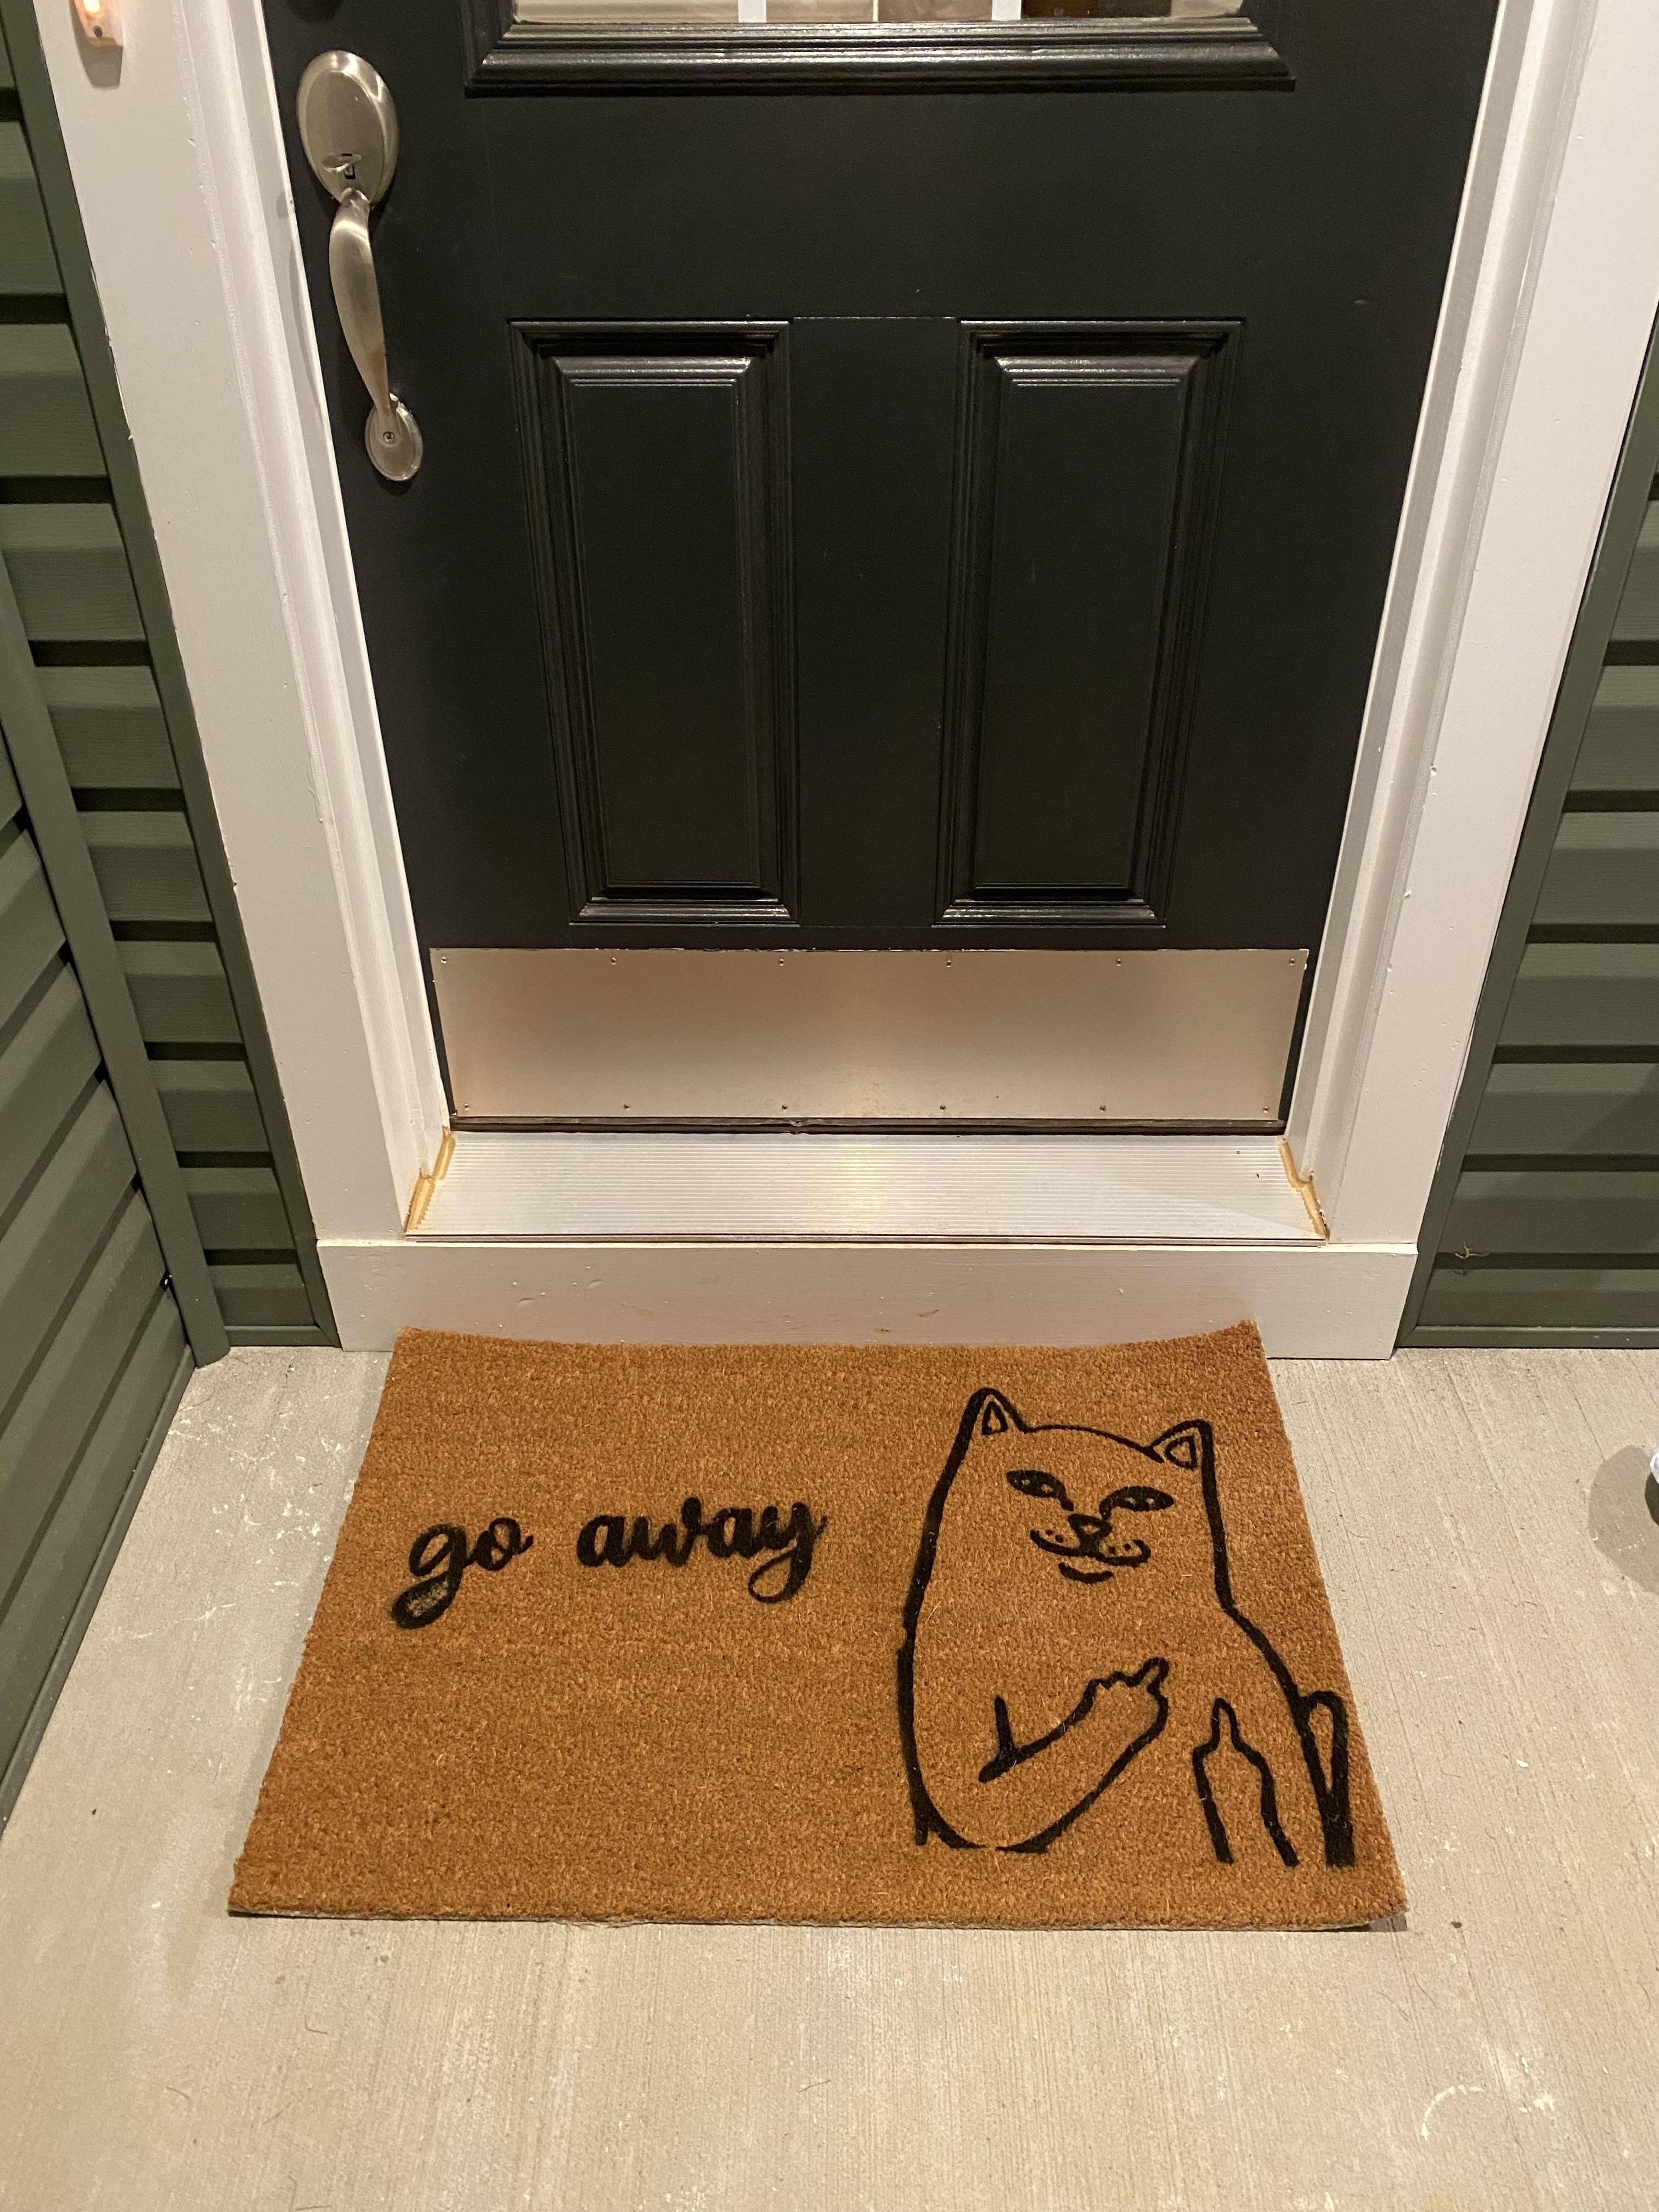 New house = new welcome mat